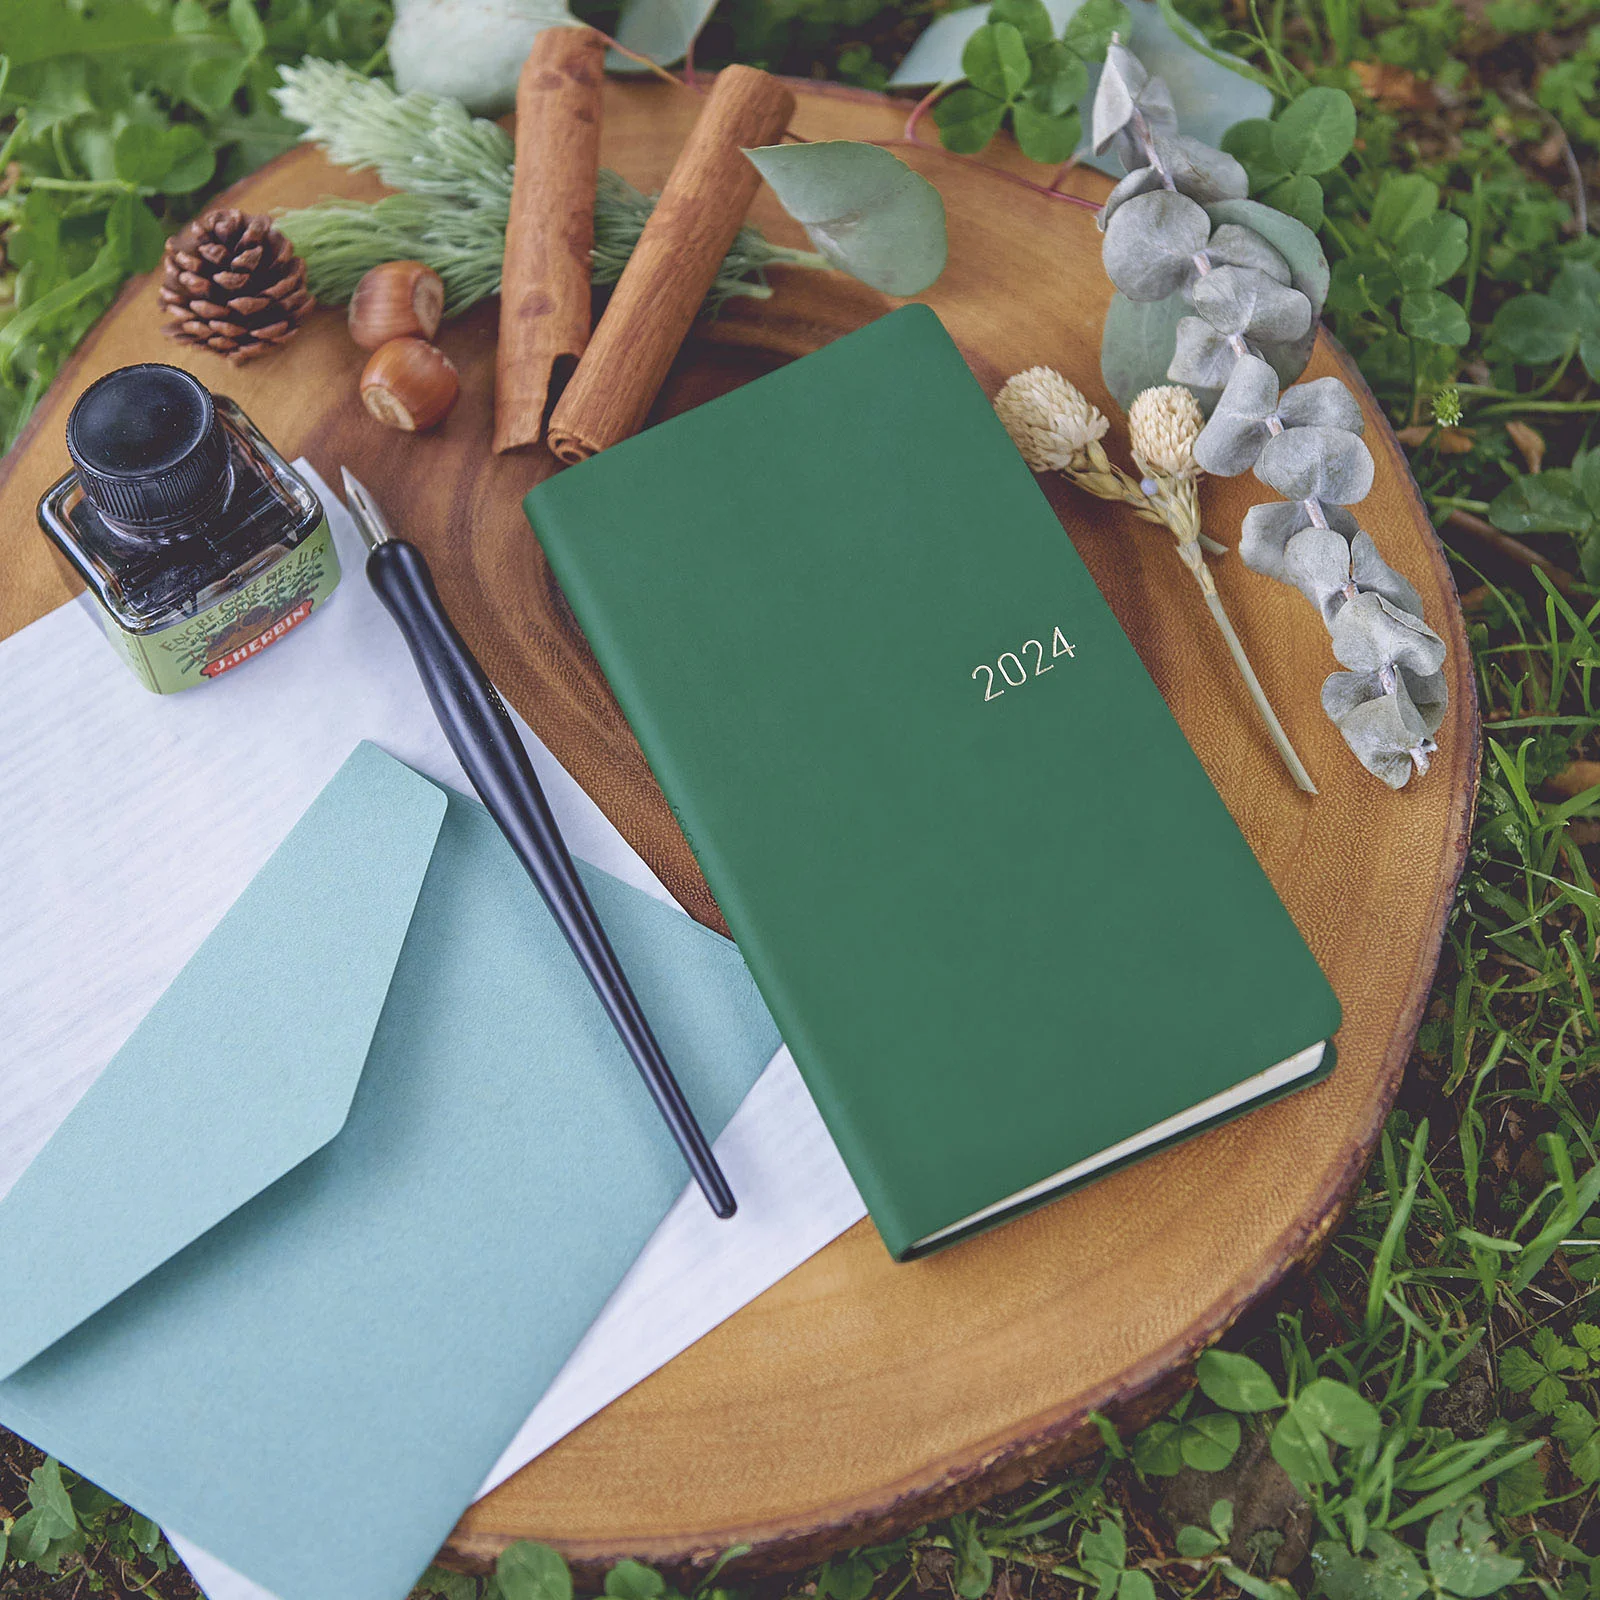 Smooth: Forest Green Weeks Softcover Book - Techo Lineup - Techo - Hobonichi  Techo 2024